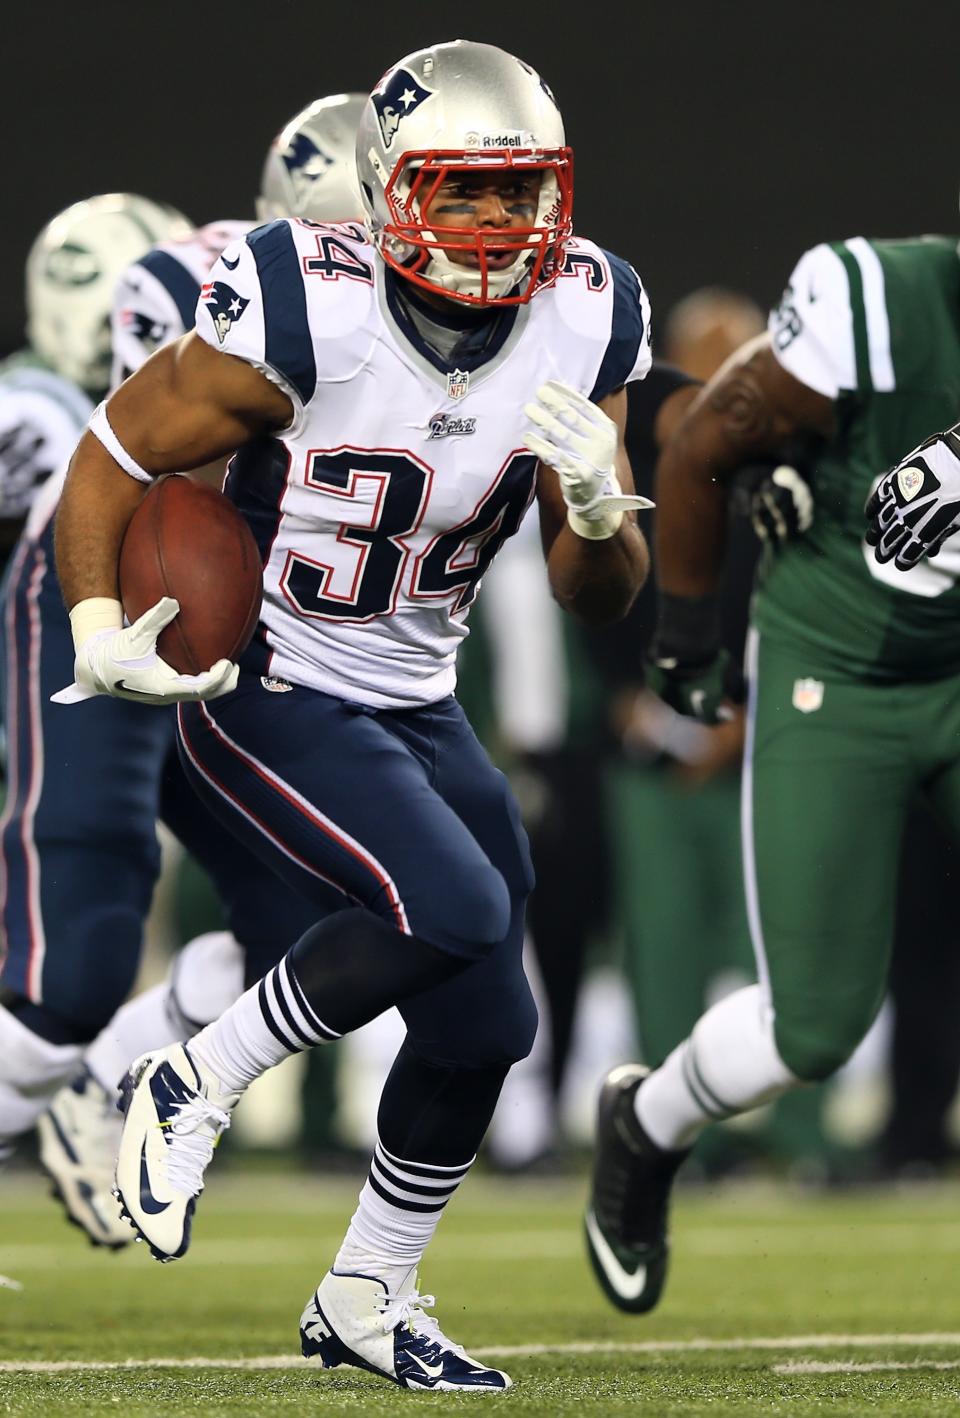 Shane Vereen #34 of the New England Patriots carries the ball in the first quarter against the New York Jets on November 22, 2012 at MetLife Stadium in East Rutherford, New Jersey. (Photo by Elsa/Getty Images)